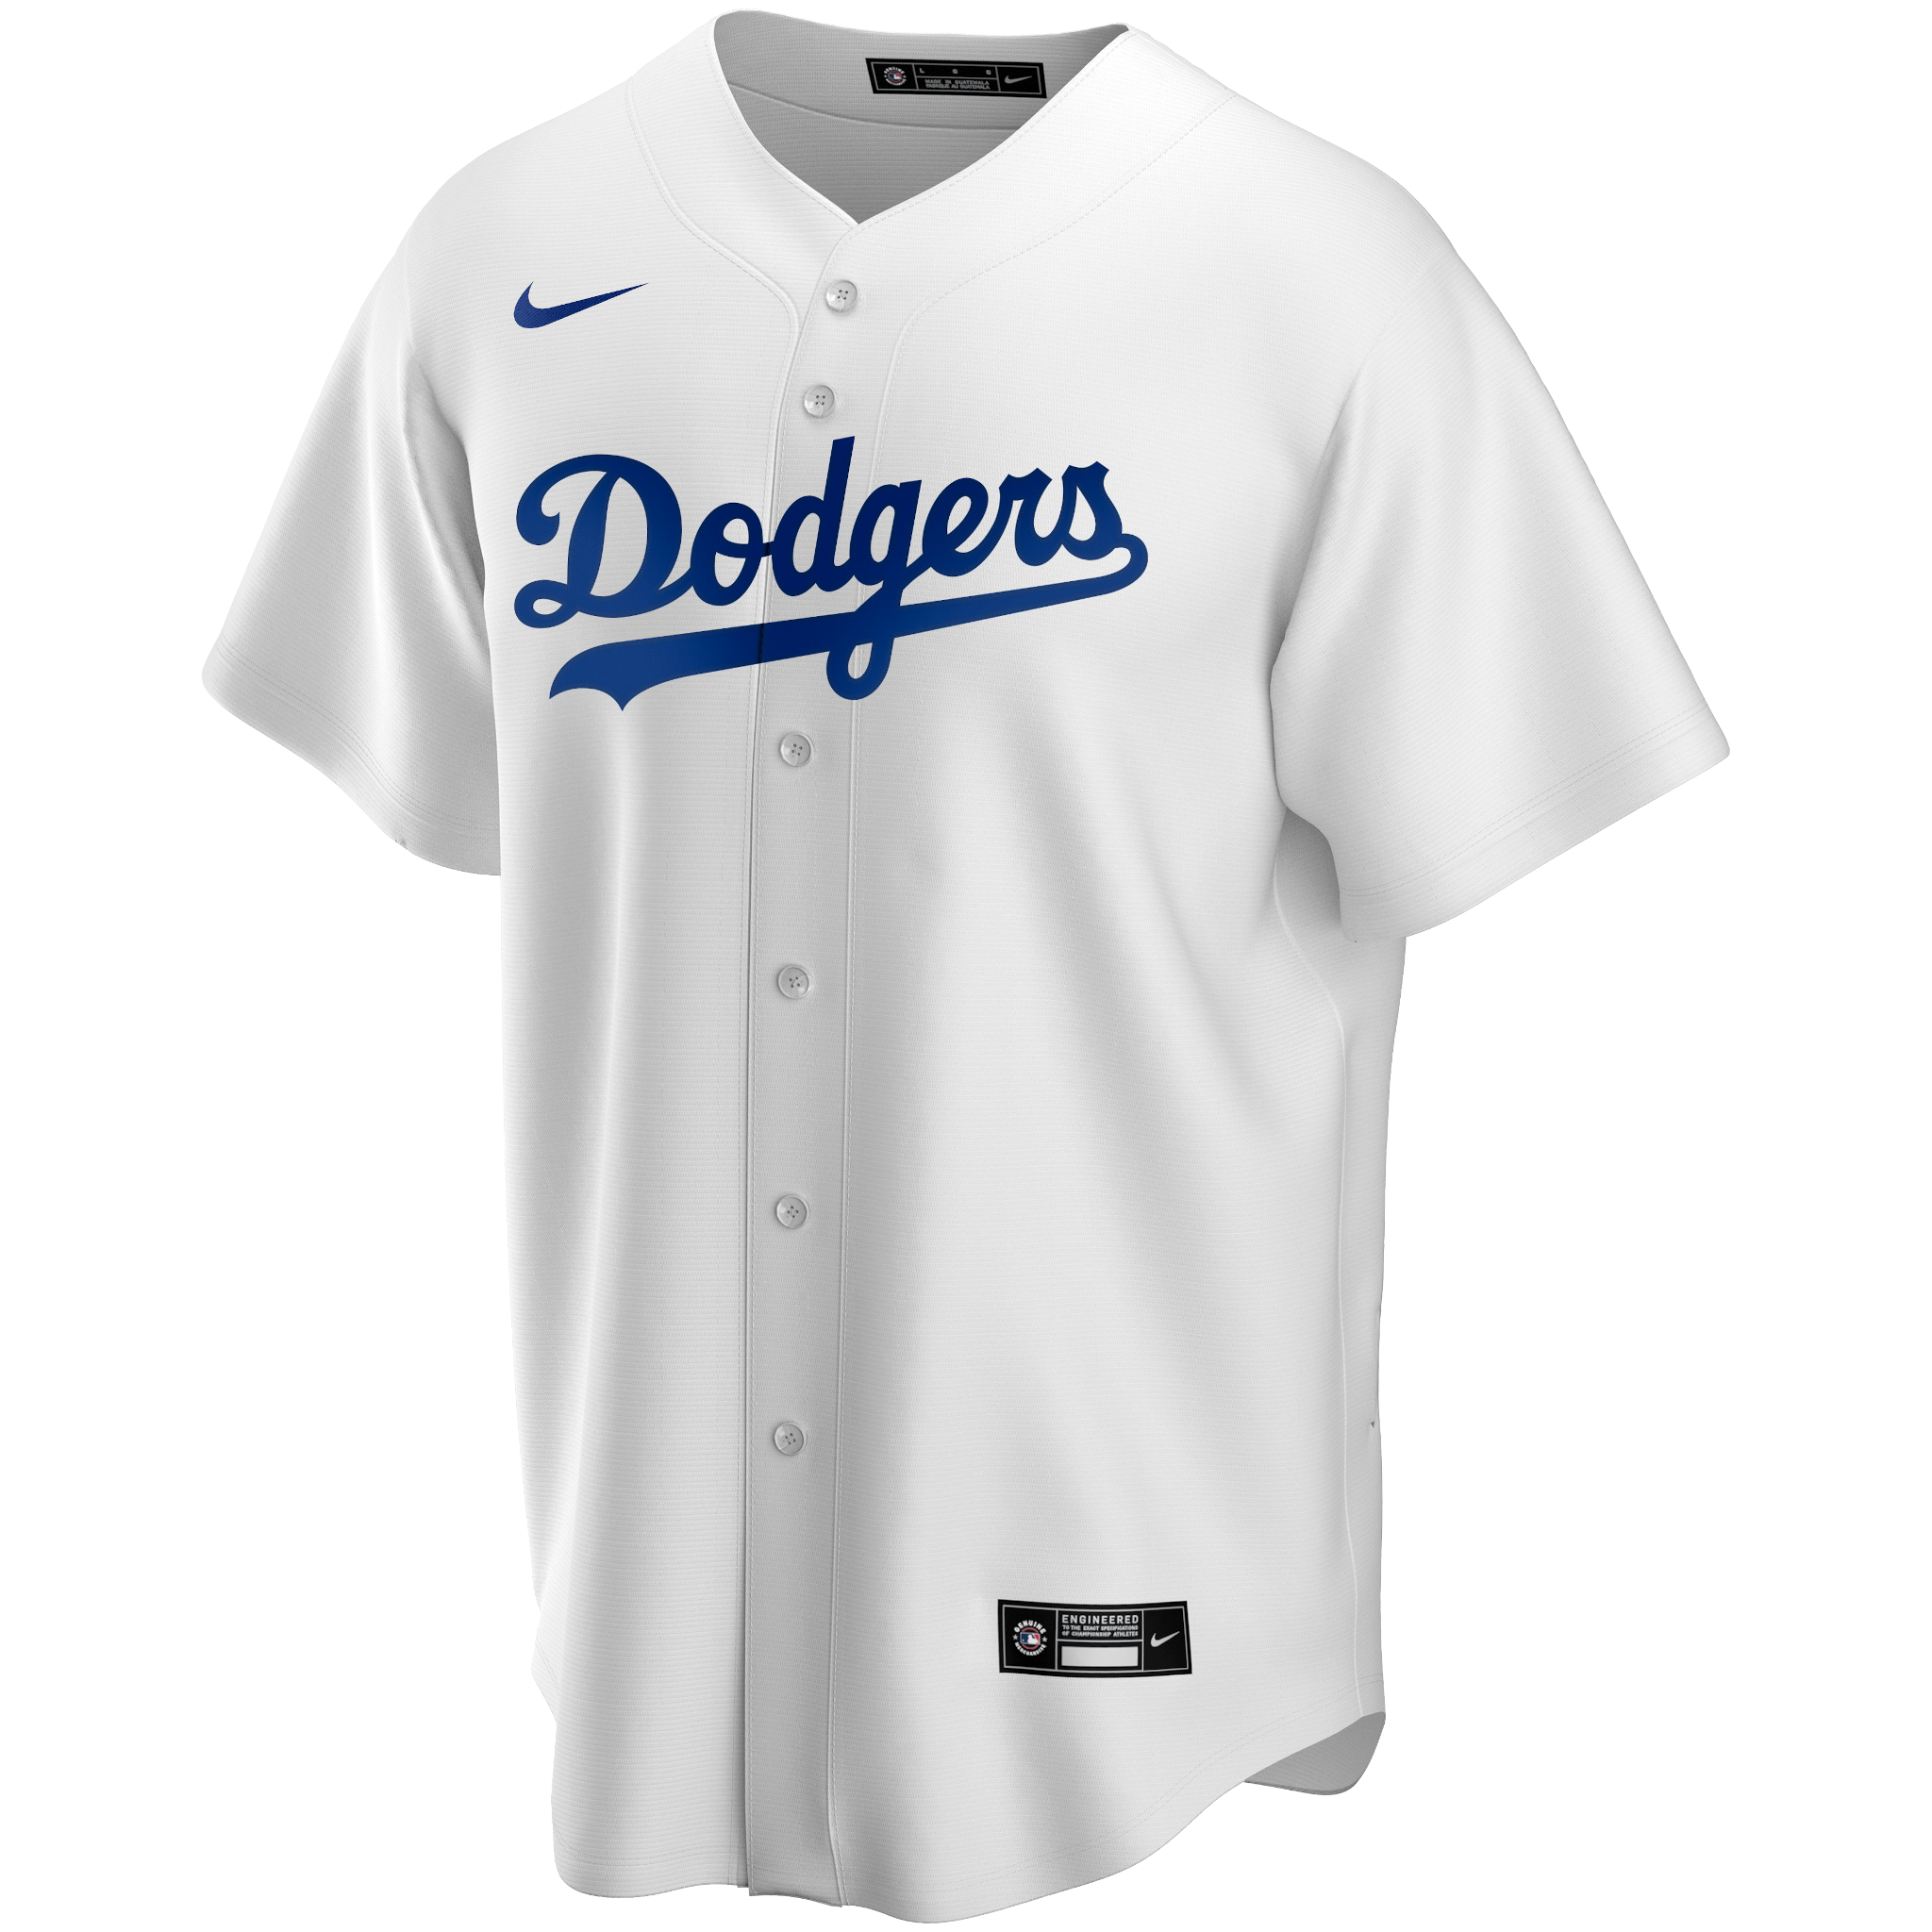 Dodgers Throwback Uniforms, Everyone in 42 for Jackie Robinson Day